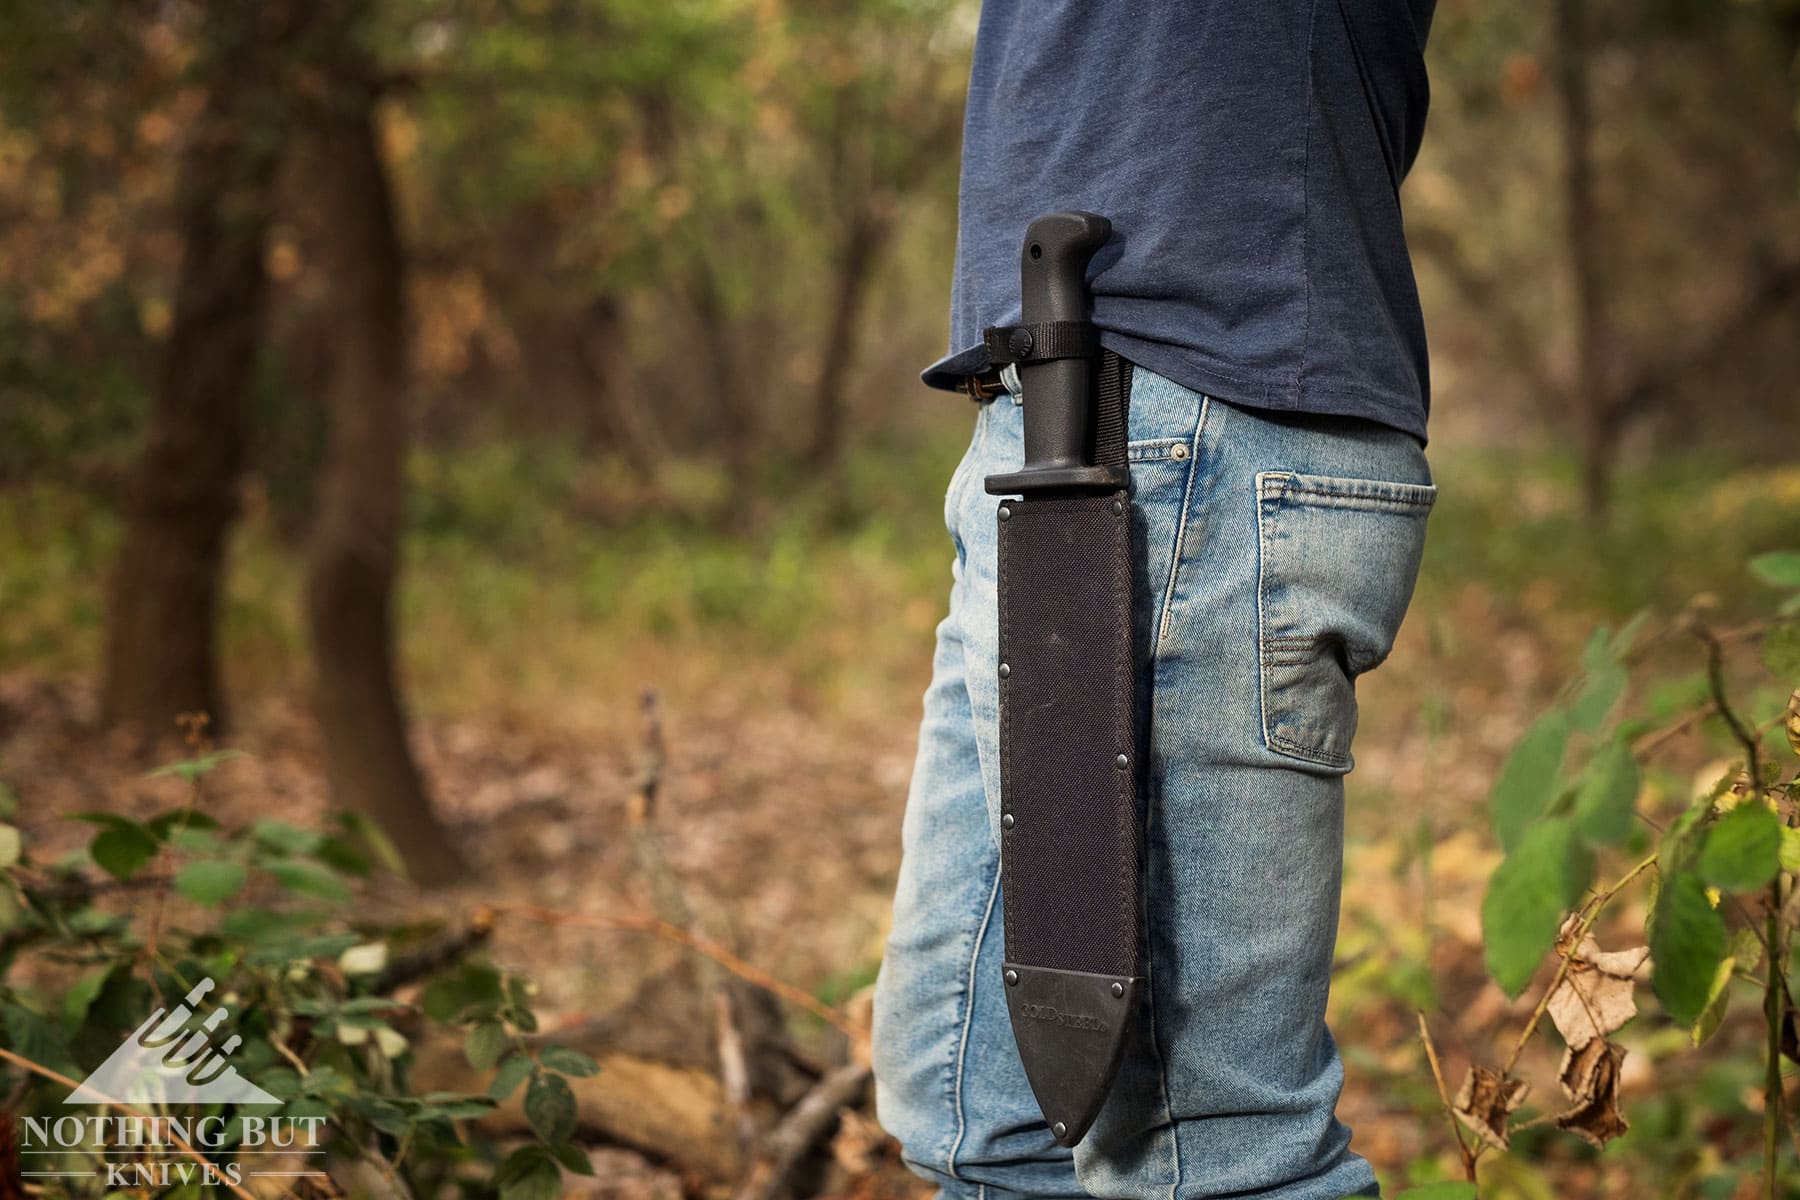 The Black Bear Bowie knife in its sheath on a person's hip.